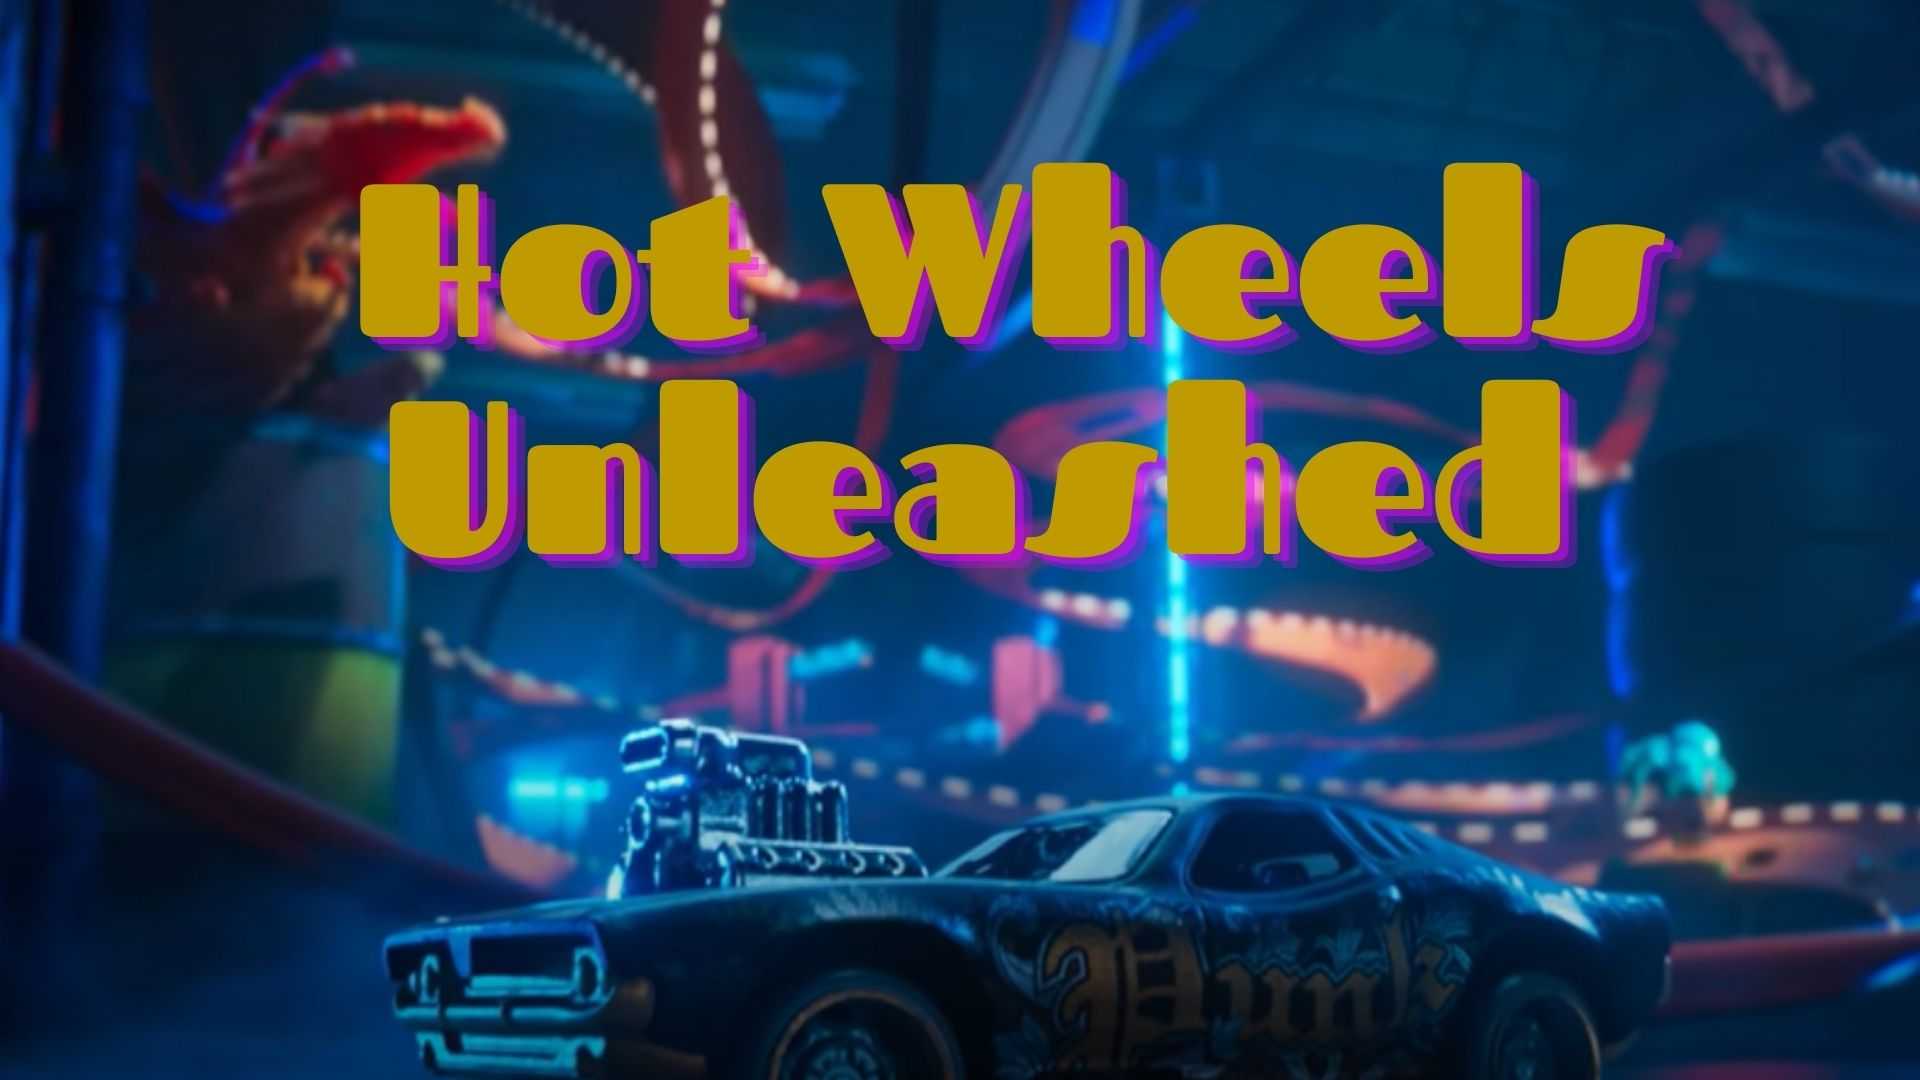 Hot Wheels Unleashed Age Rating Parents Guide, Price %currentyear%